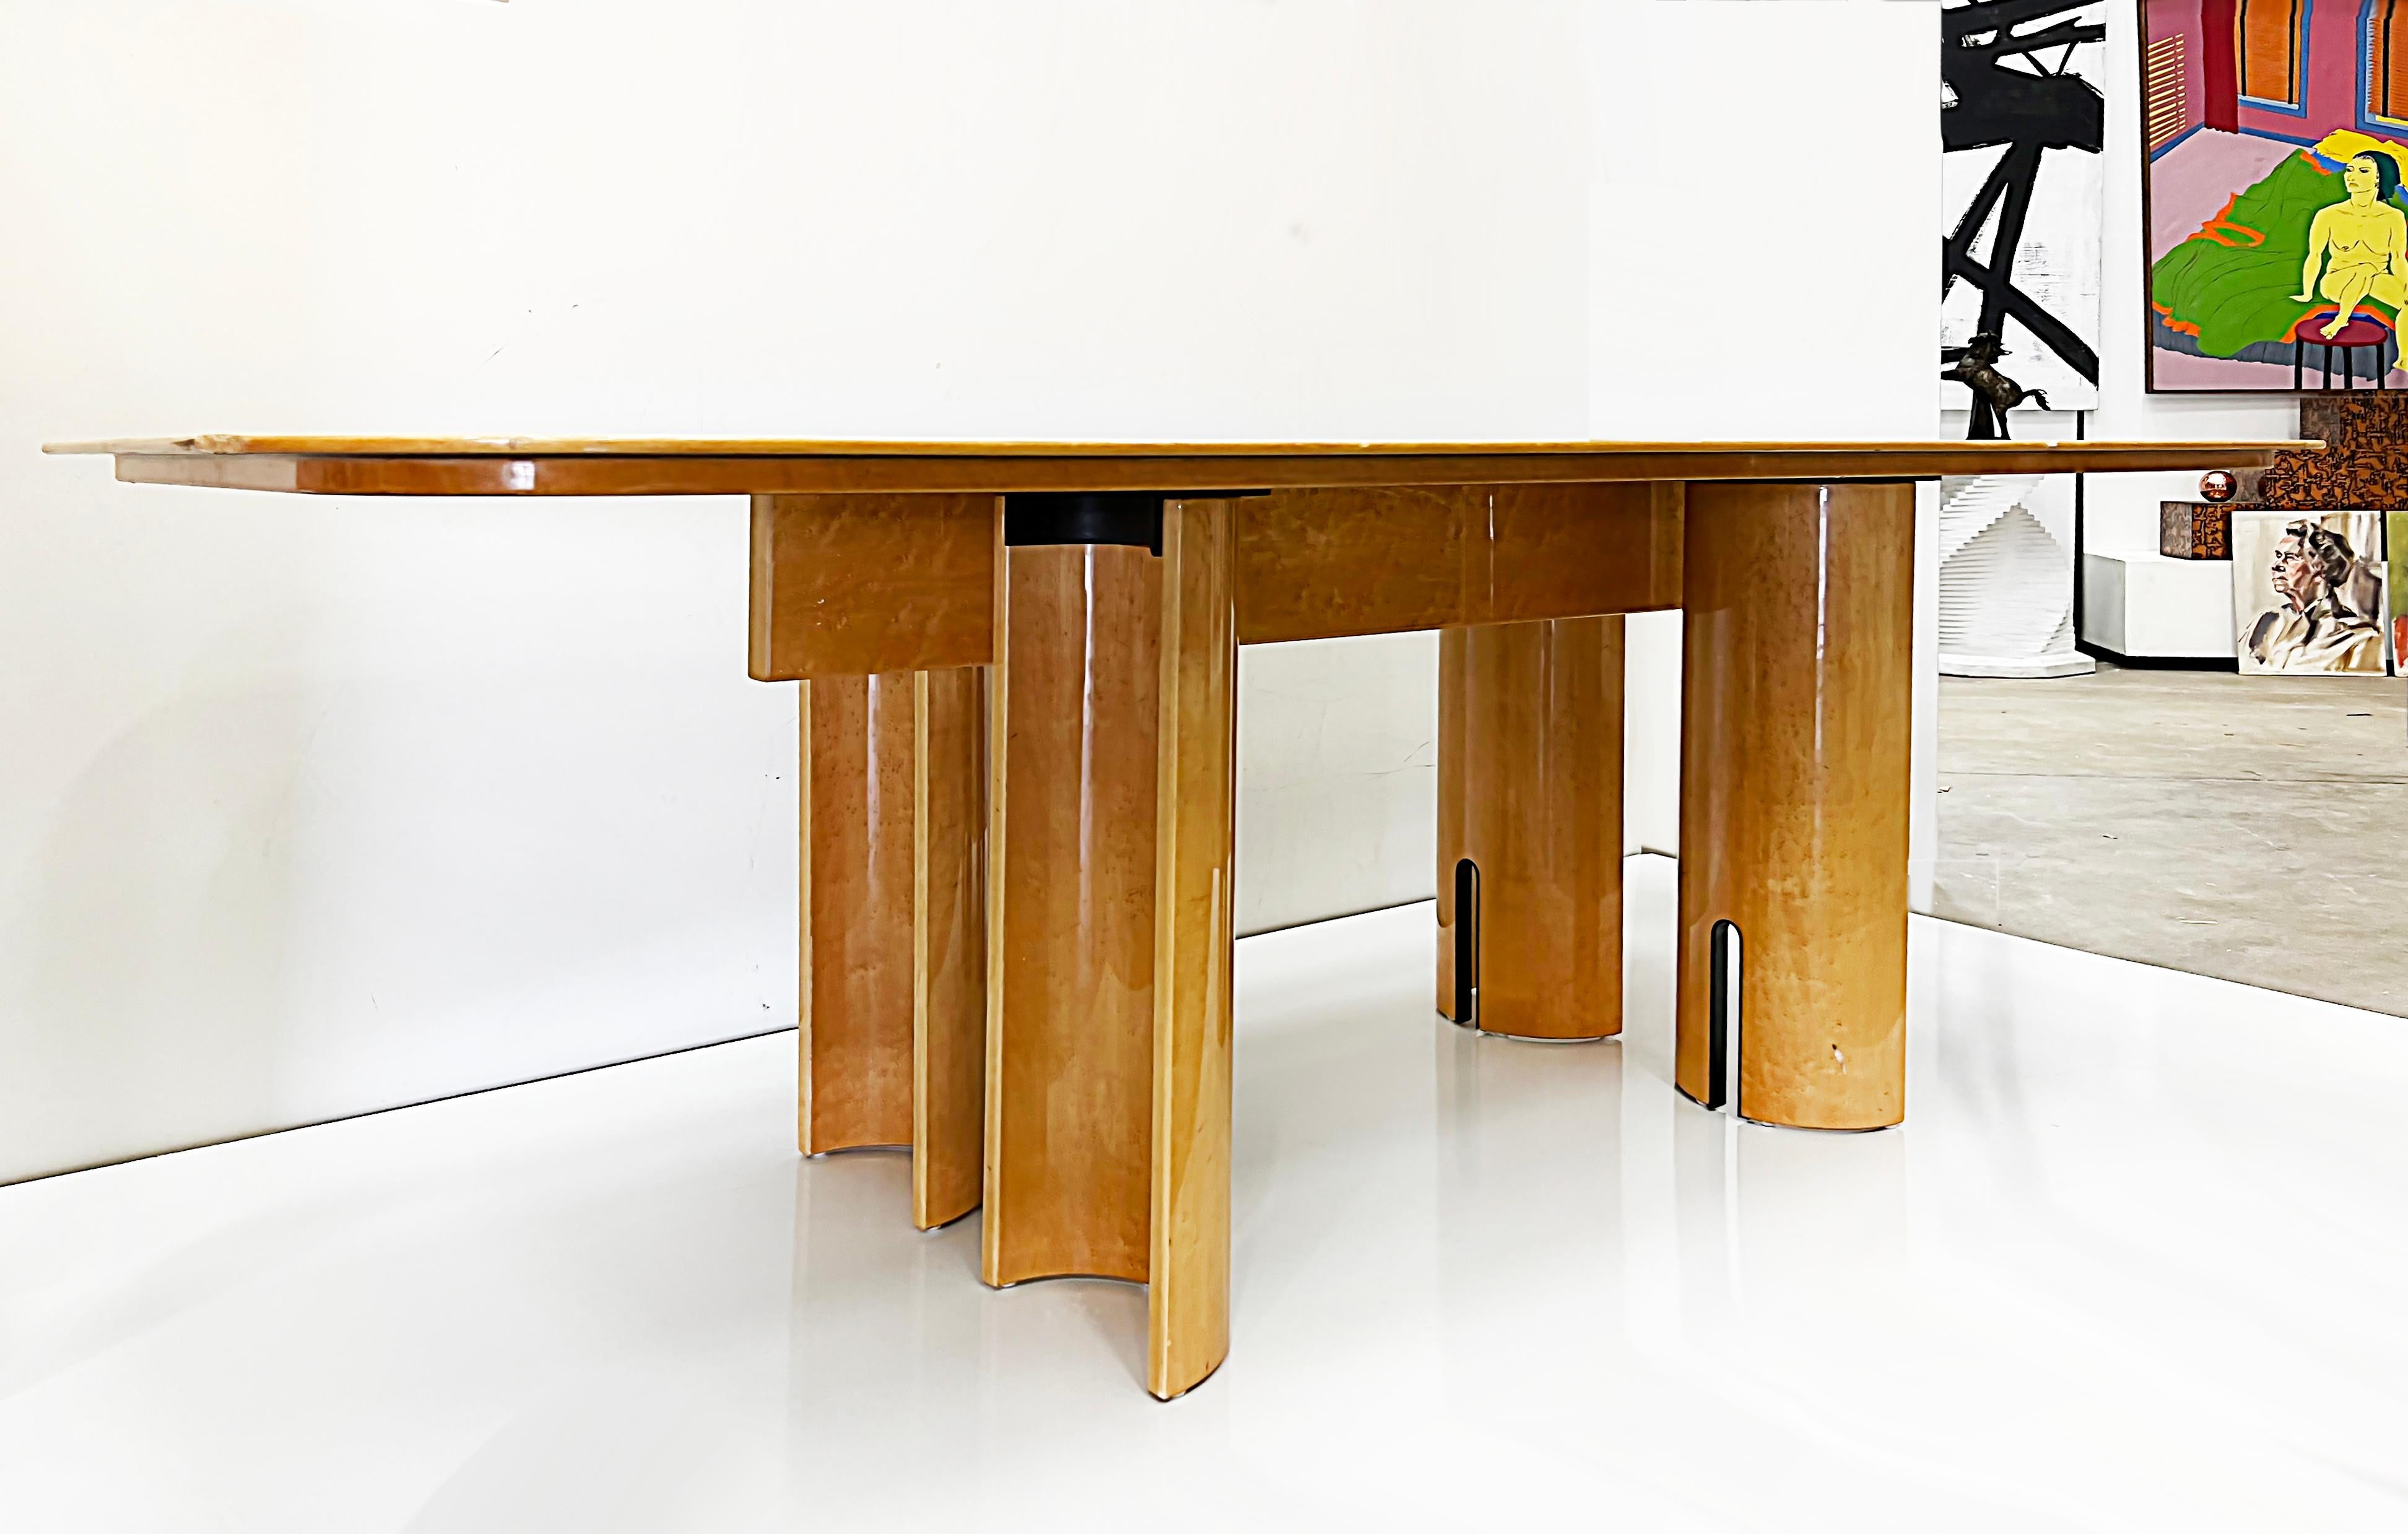 Giovanni Offredi Saporiti, Italy birdseye maple dining table.

Offered for sale is a circa 1980s Giovanni Offredi for Saporiti, Italy dining table. The table is constructed with a laminated birdseye maple rectangular top with rounded corners which